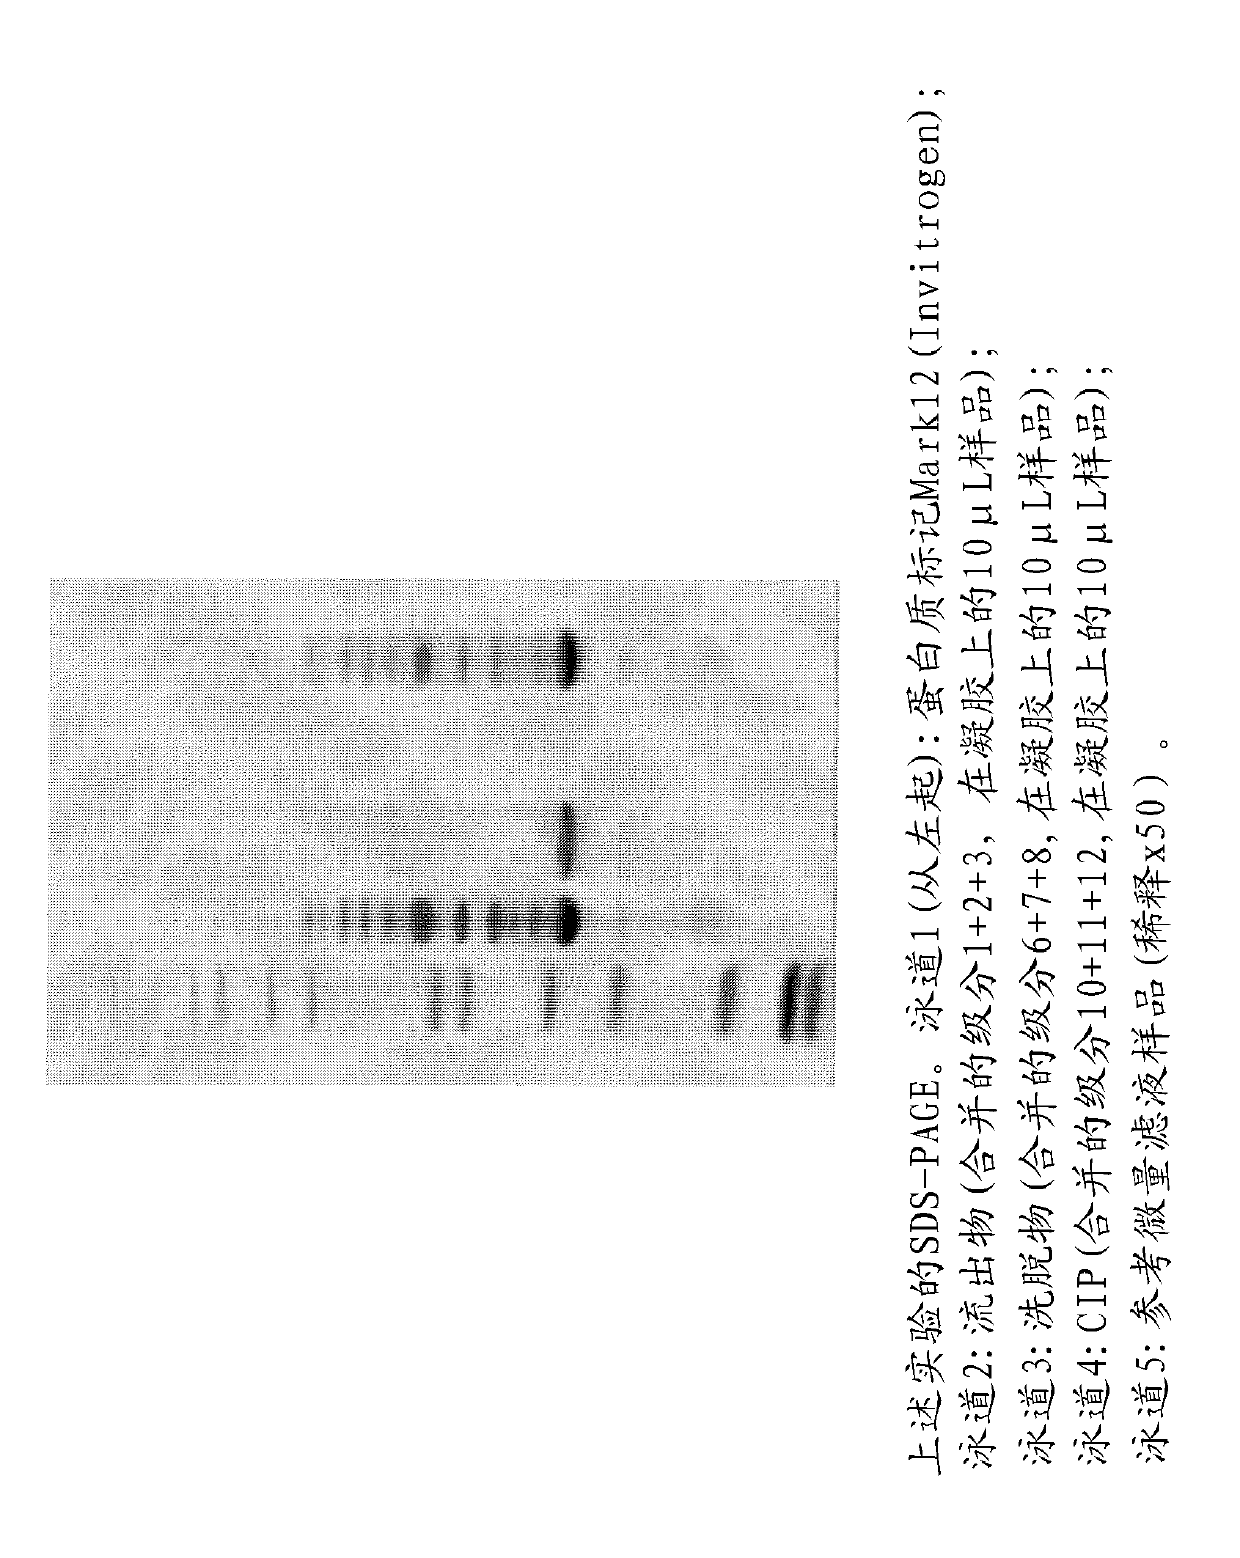 Process for the purification of human growth hormone polypeptides using affinity resins comprising specific ligands